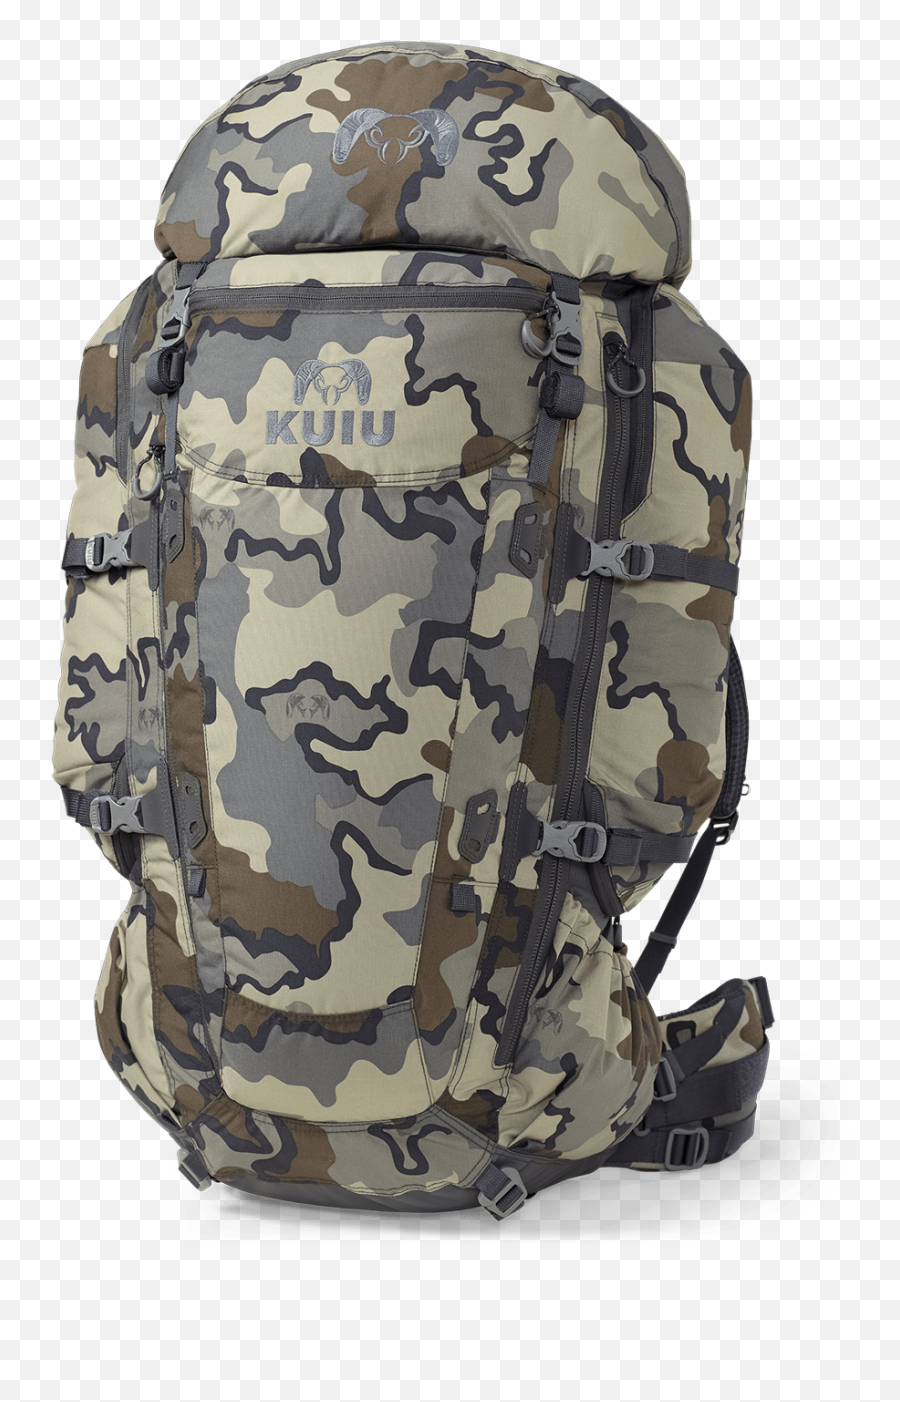 Know Your Hunting Bags And Packs - Hiking Equipment Png,Kuiu Icon Pro 1850